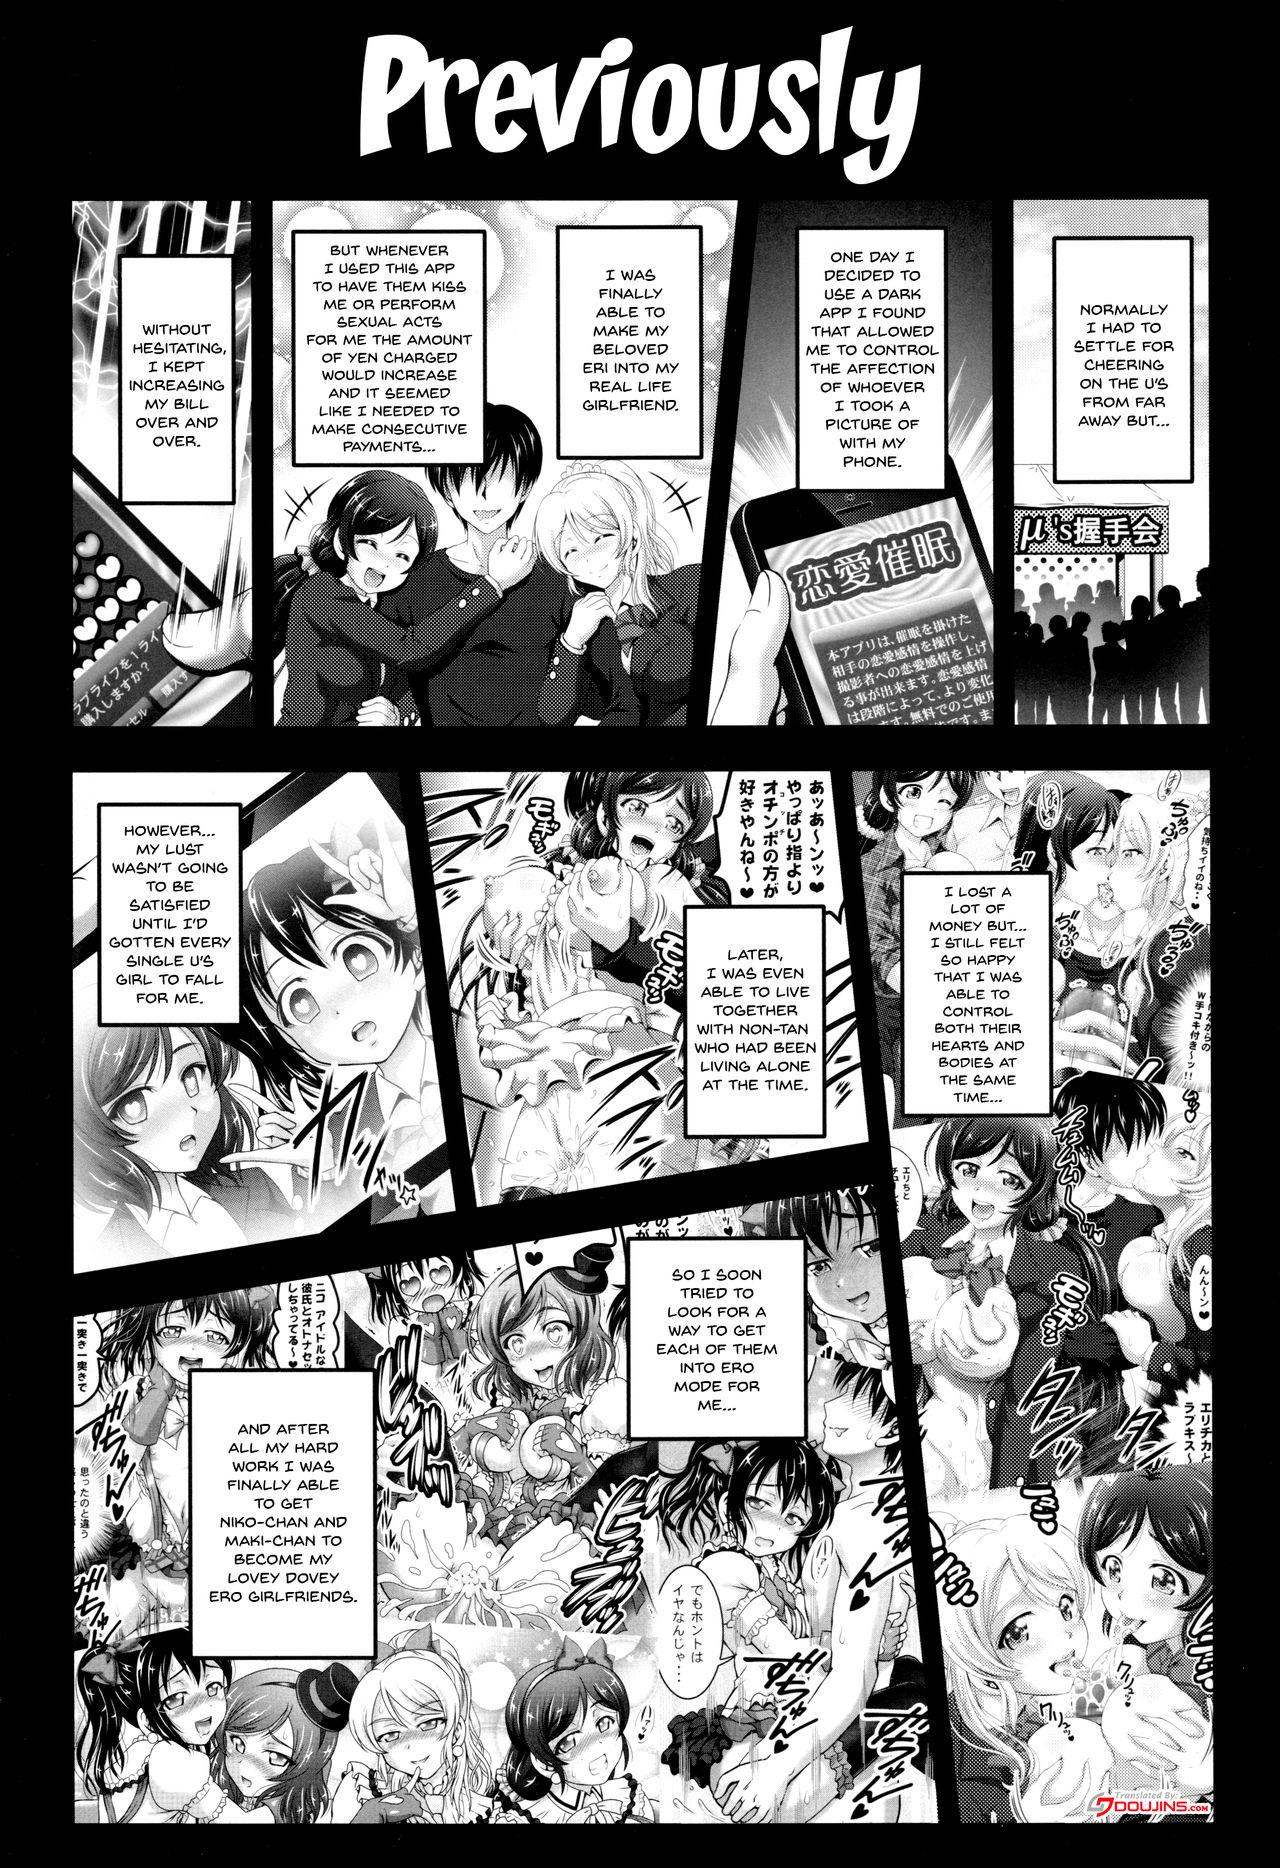 Ass Fucked Ore Yome Saimin 4 | My Wife Hypnosis 4 - Love live Fucking - Page 2